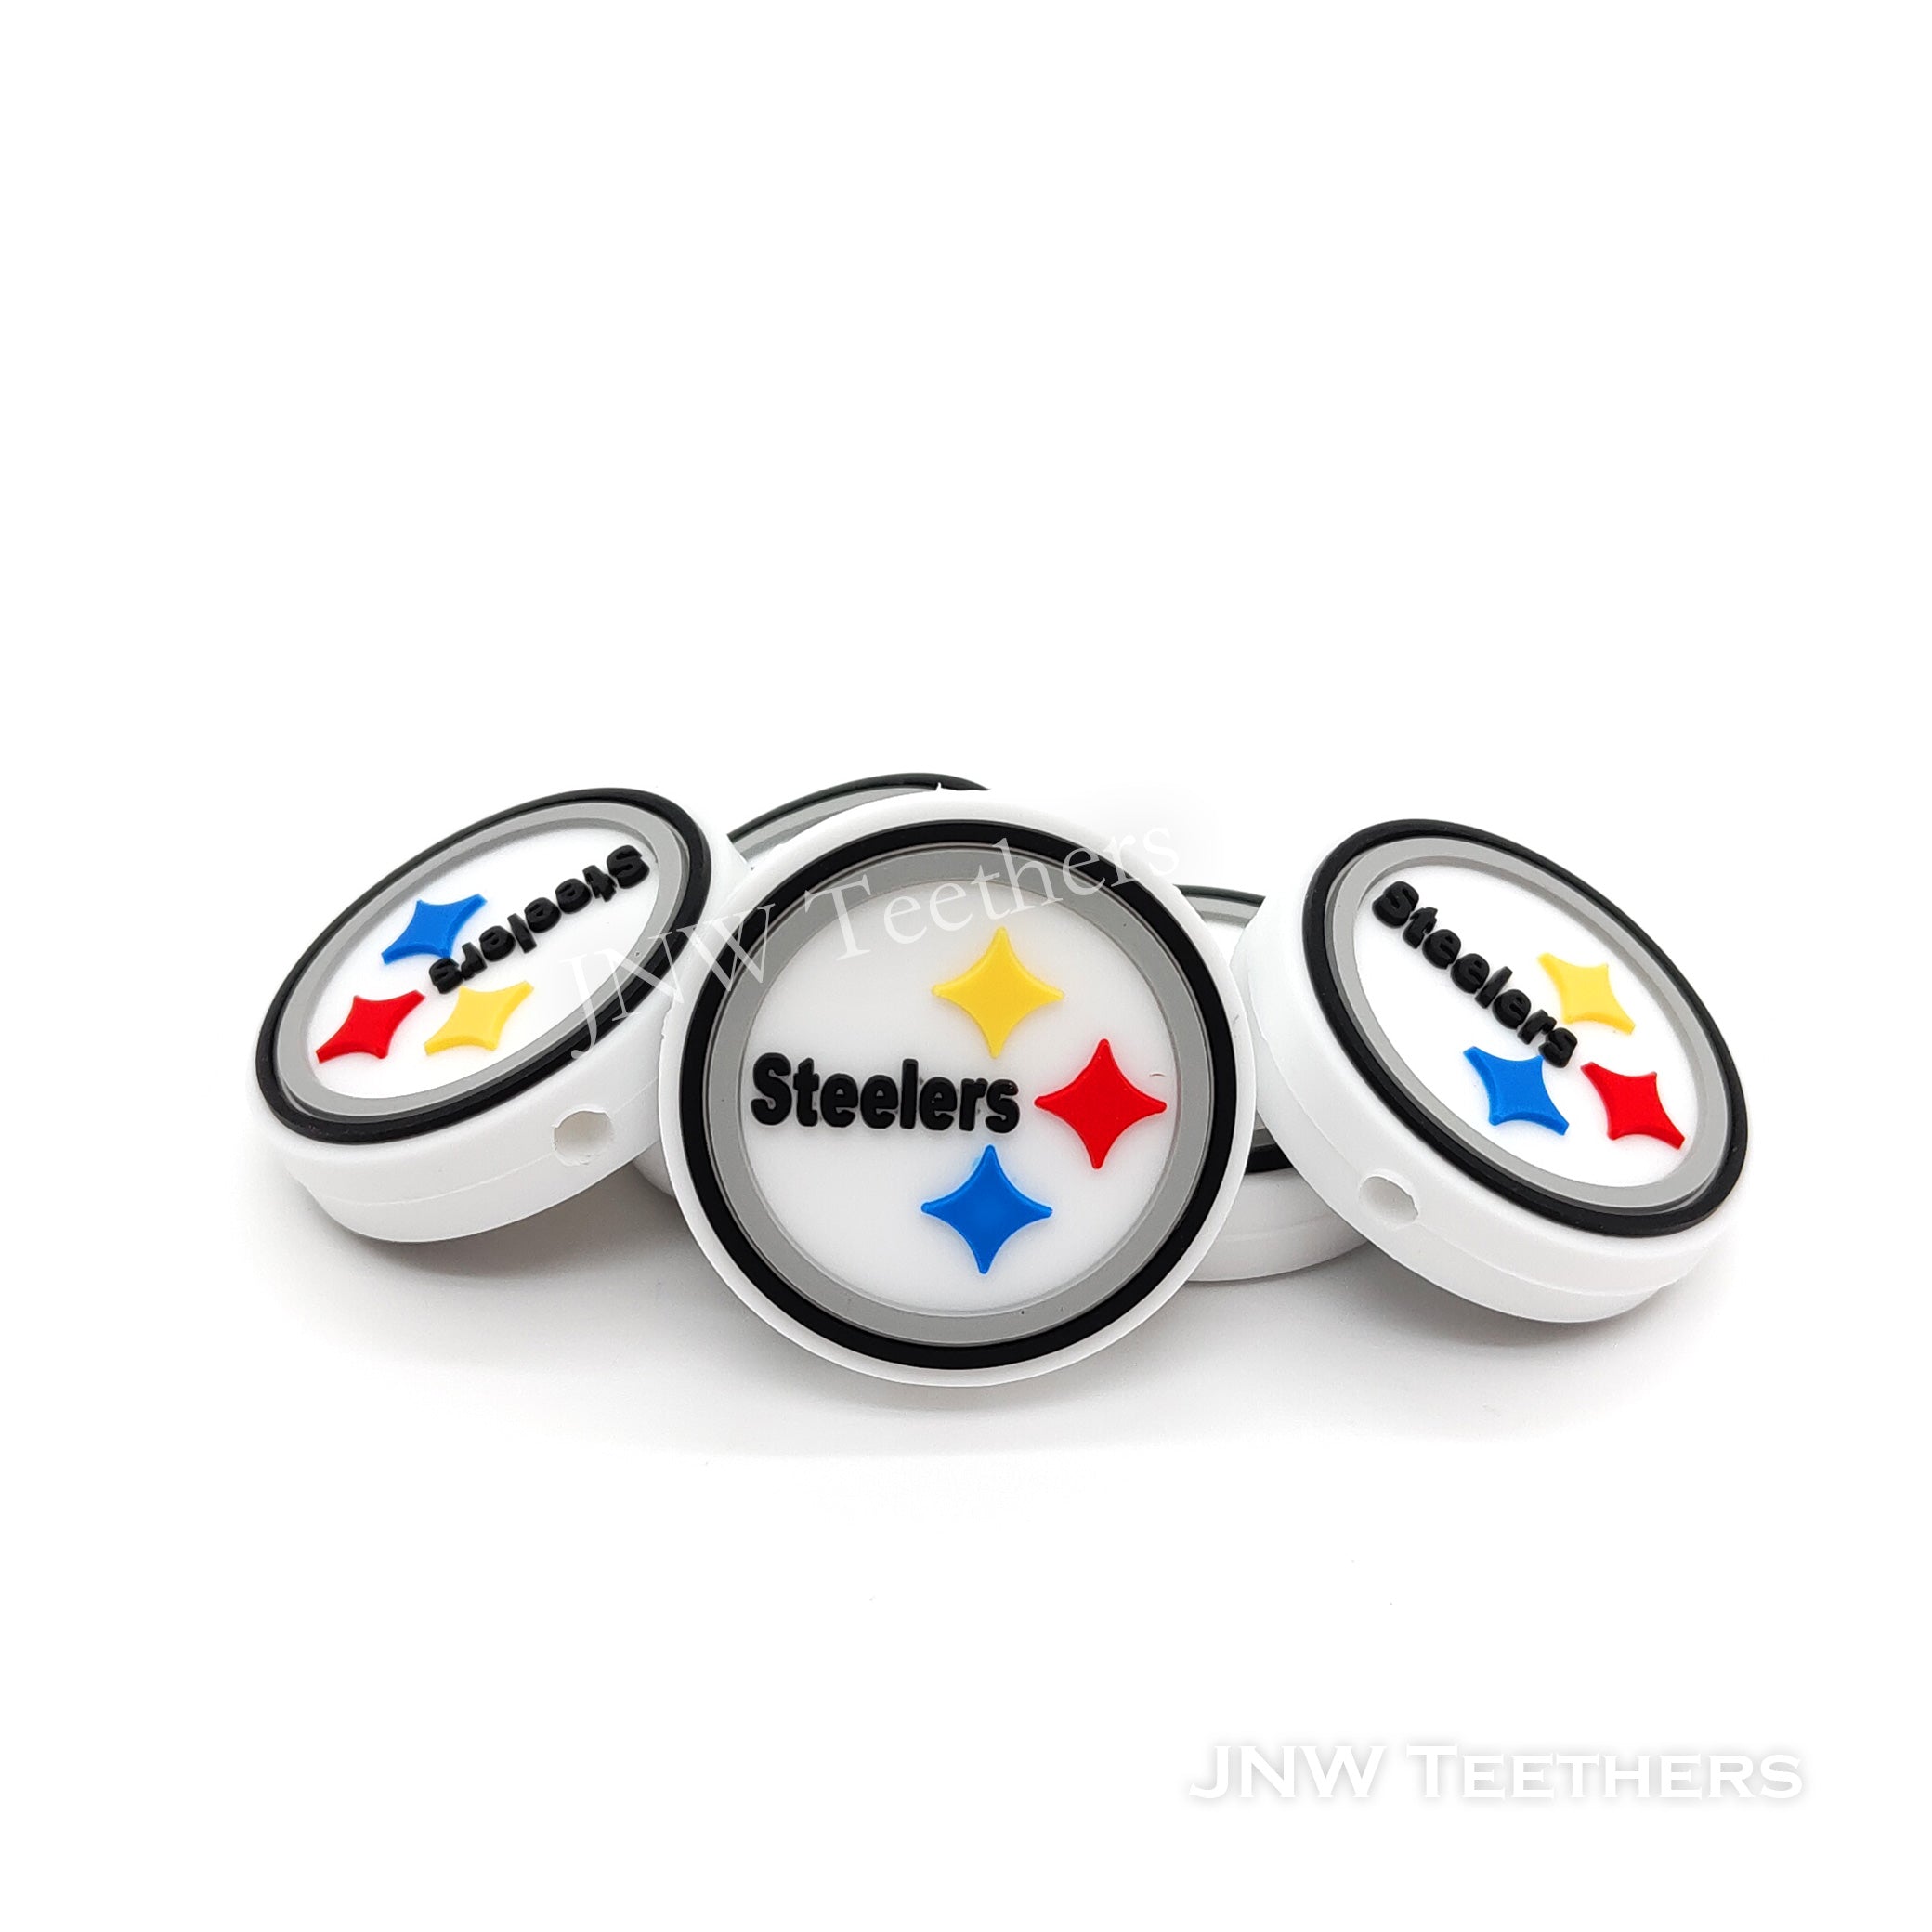 Steelers Football Teams White Round silicone focal beads